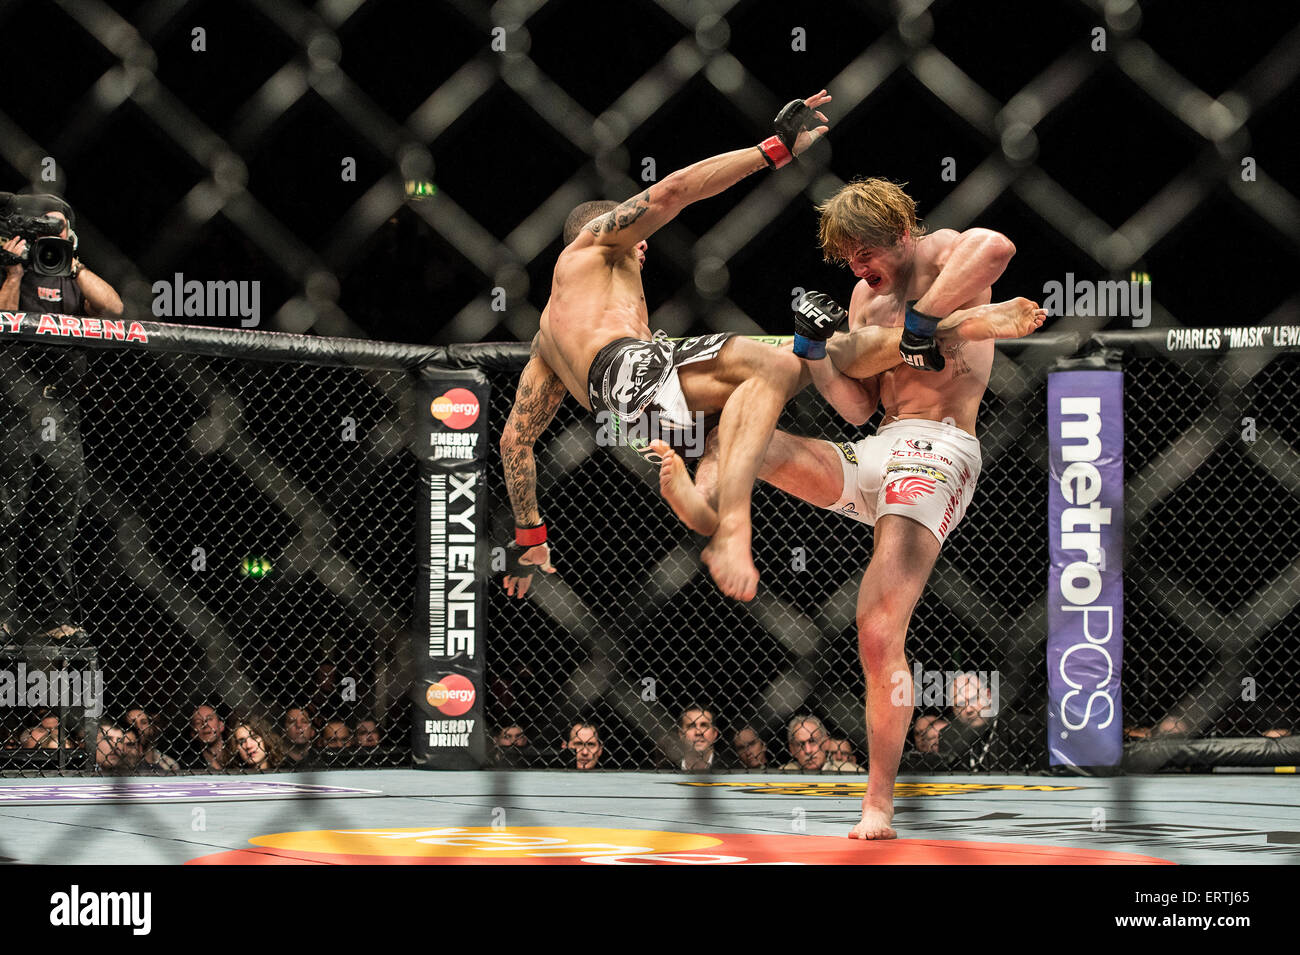 UFC Ultimate Fighting Championship bout in the ring cage octagon at Wembley  Arena in London England Stock Photo - Alamy